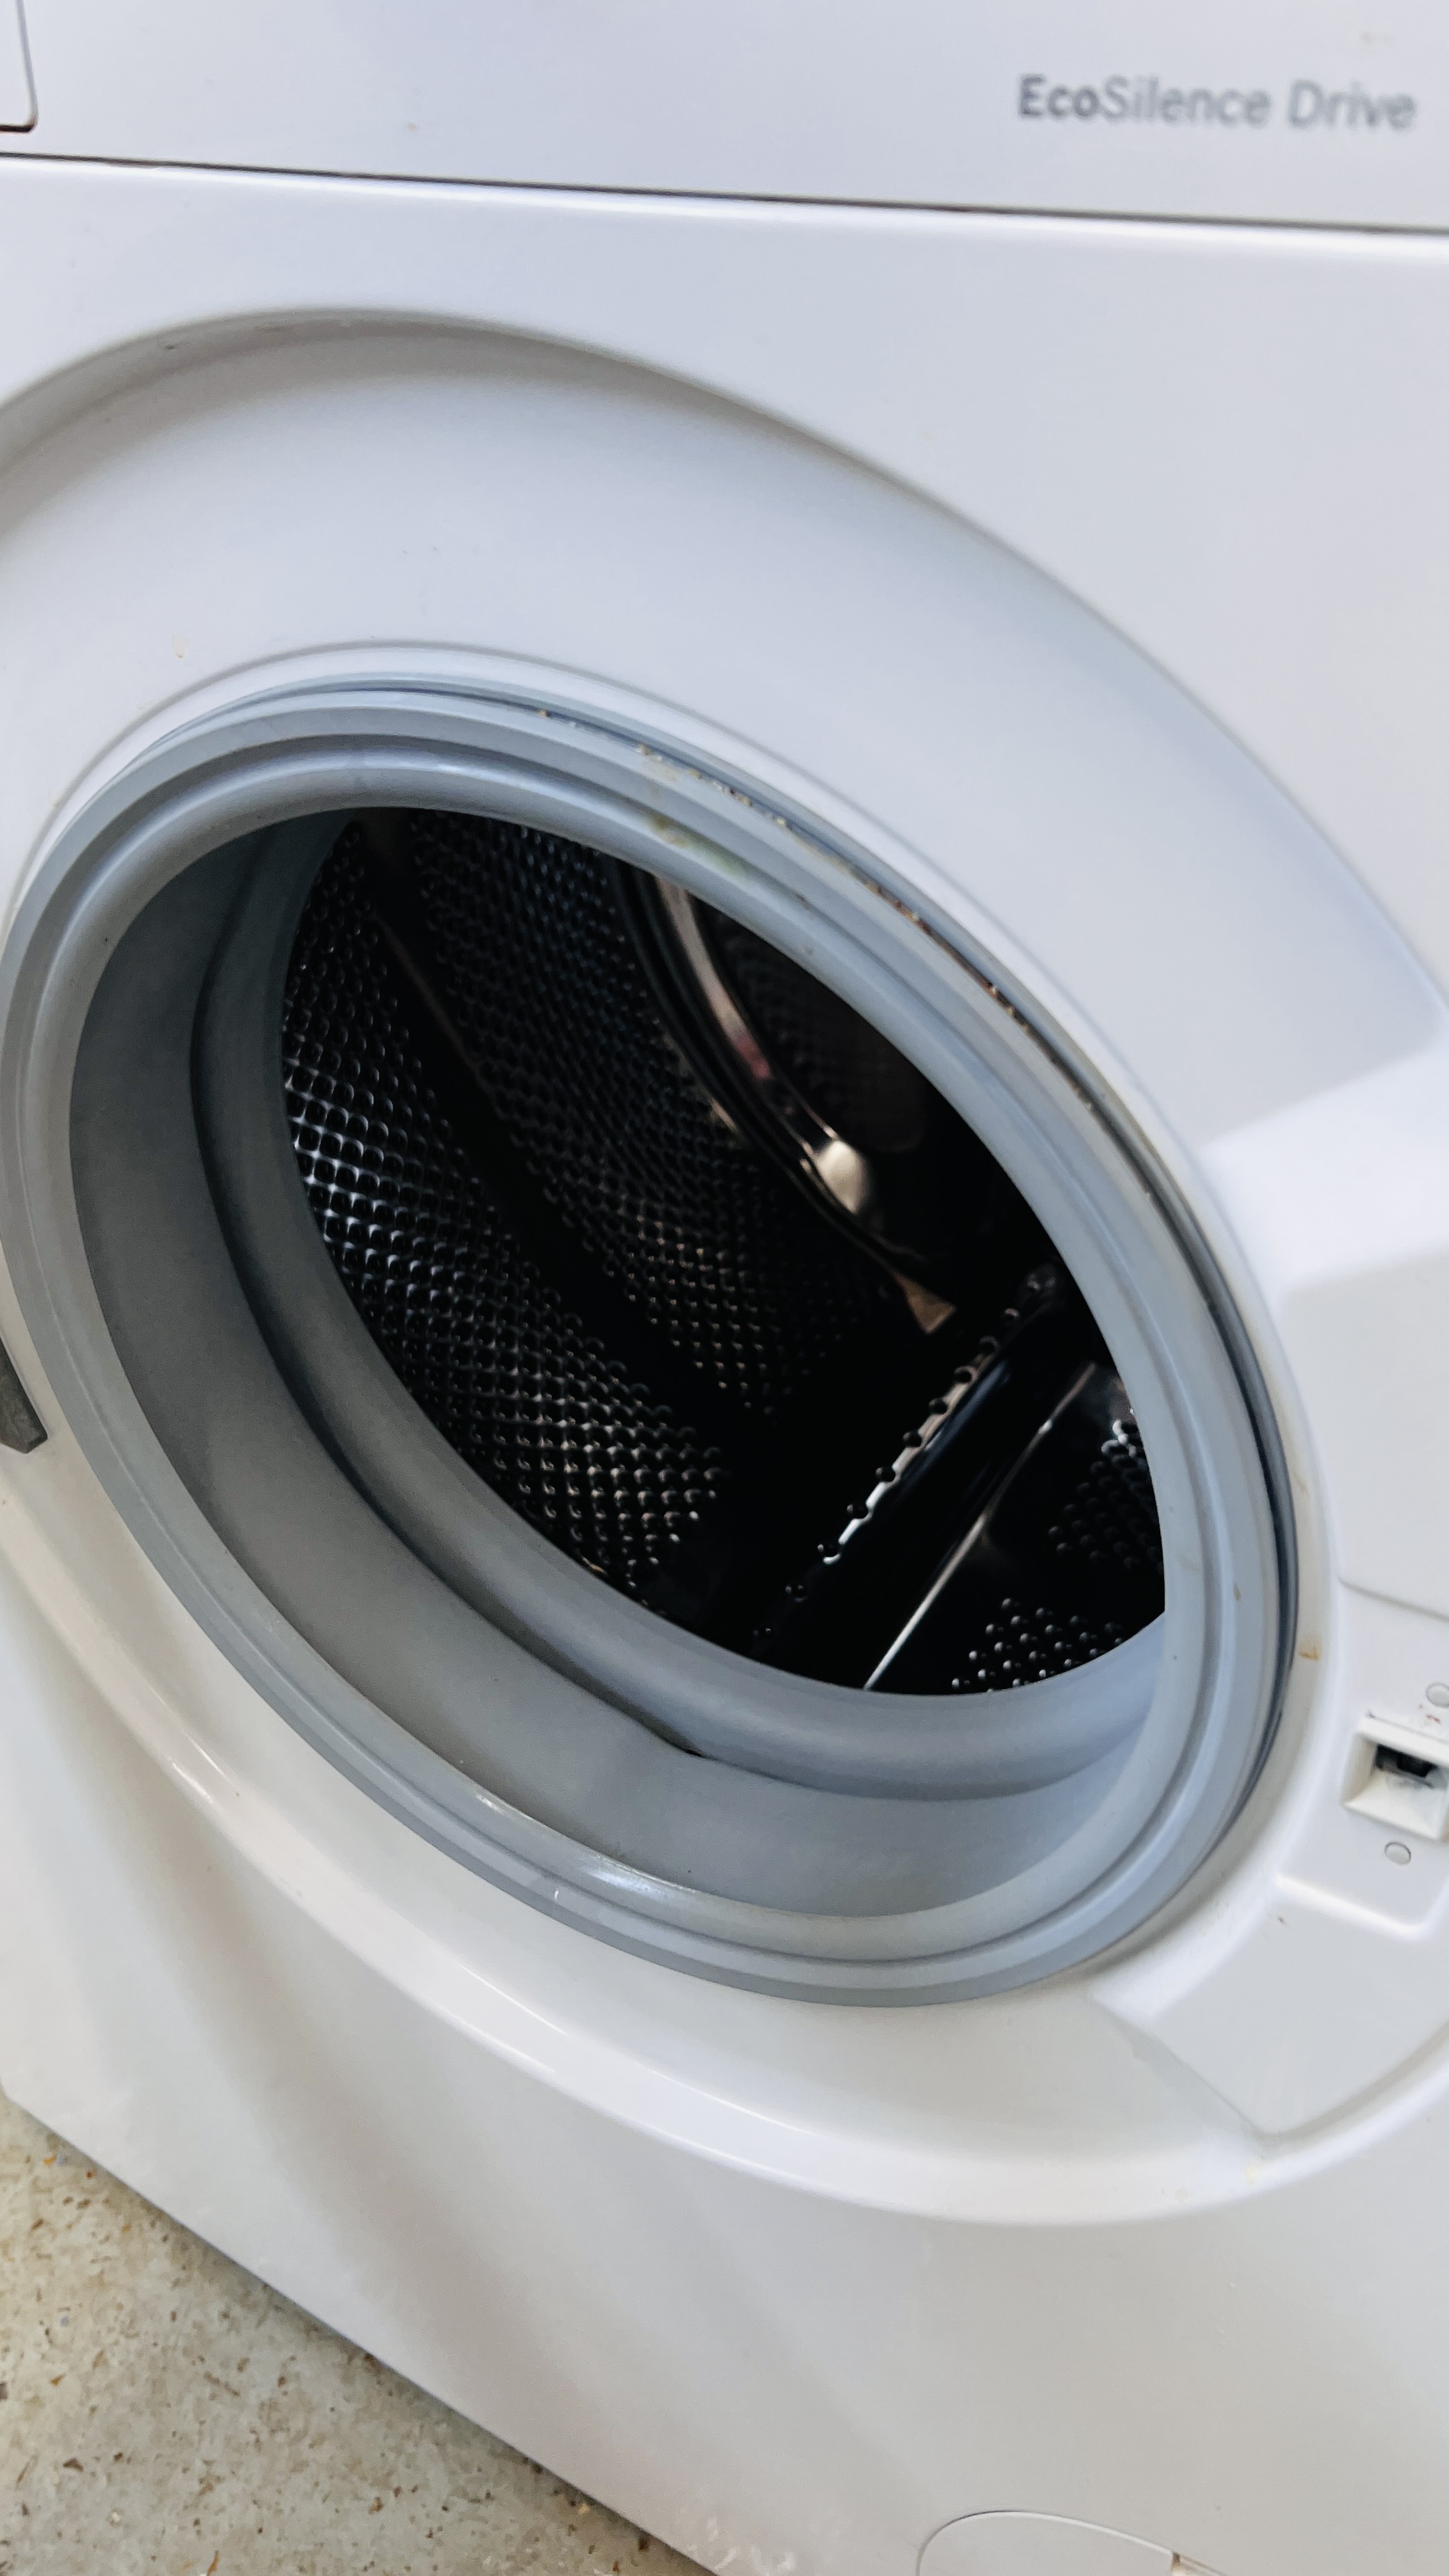 A BOSCH SERI 4 VARIOPERFECT ECO SILENCE DRIVE WASHING MACHINE - SOLD AS SEEN. - Image 7 of 10